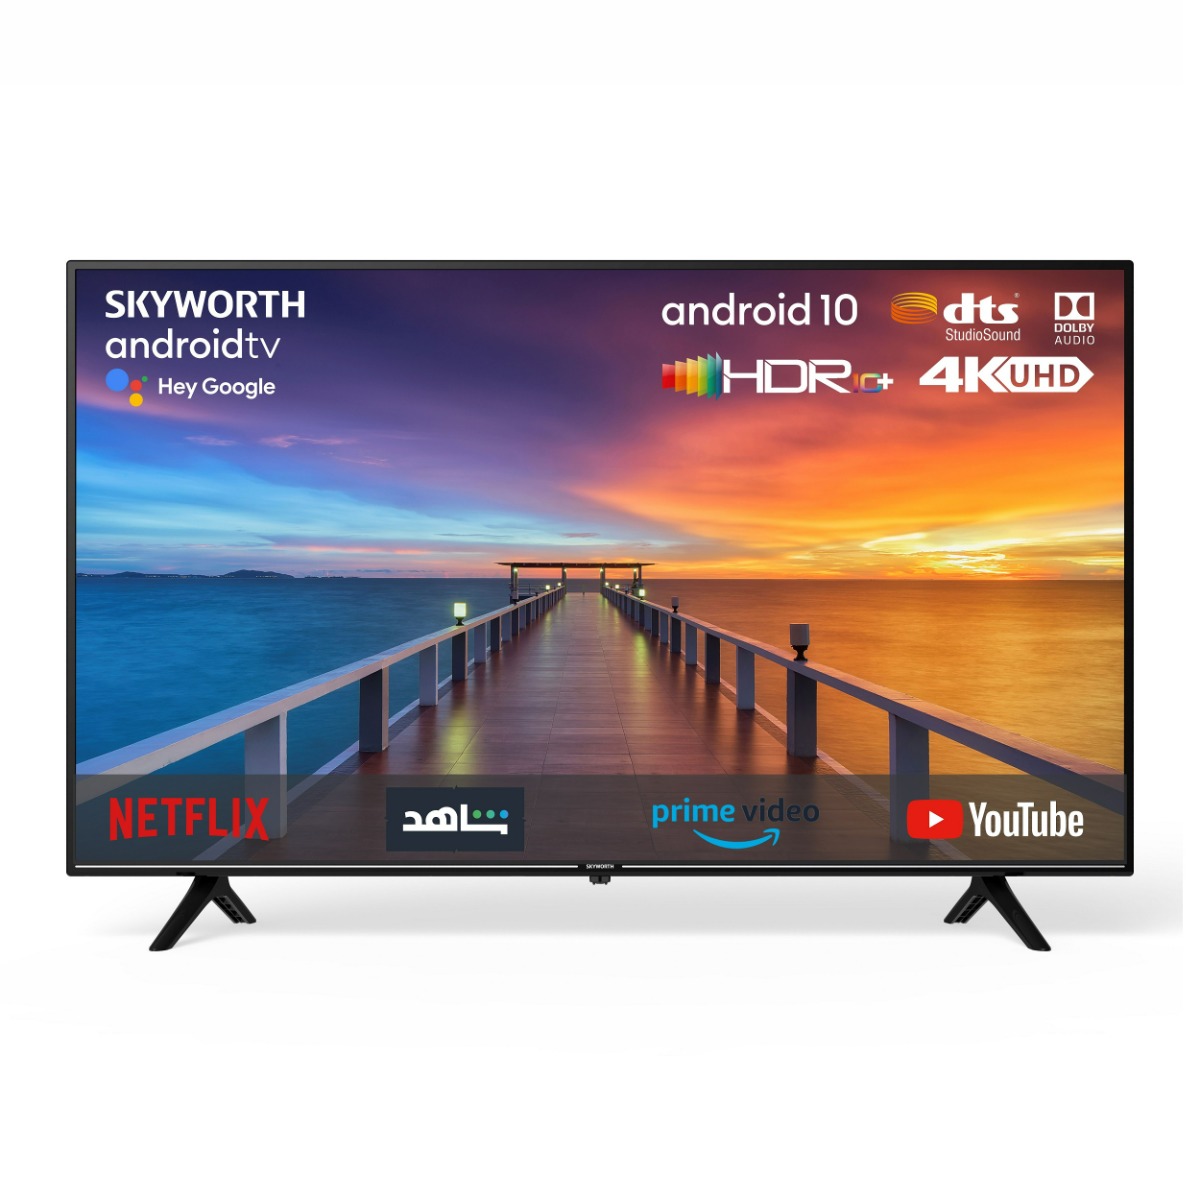 Skyworth 65inch UHD 4K, HDR 10, SMART, Android 10, LED TV- 65SUC8300